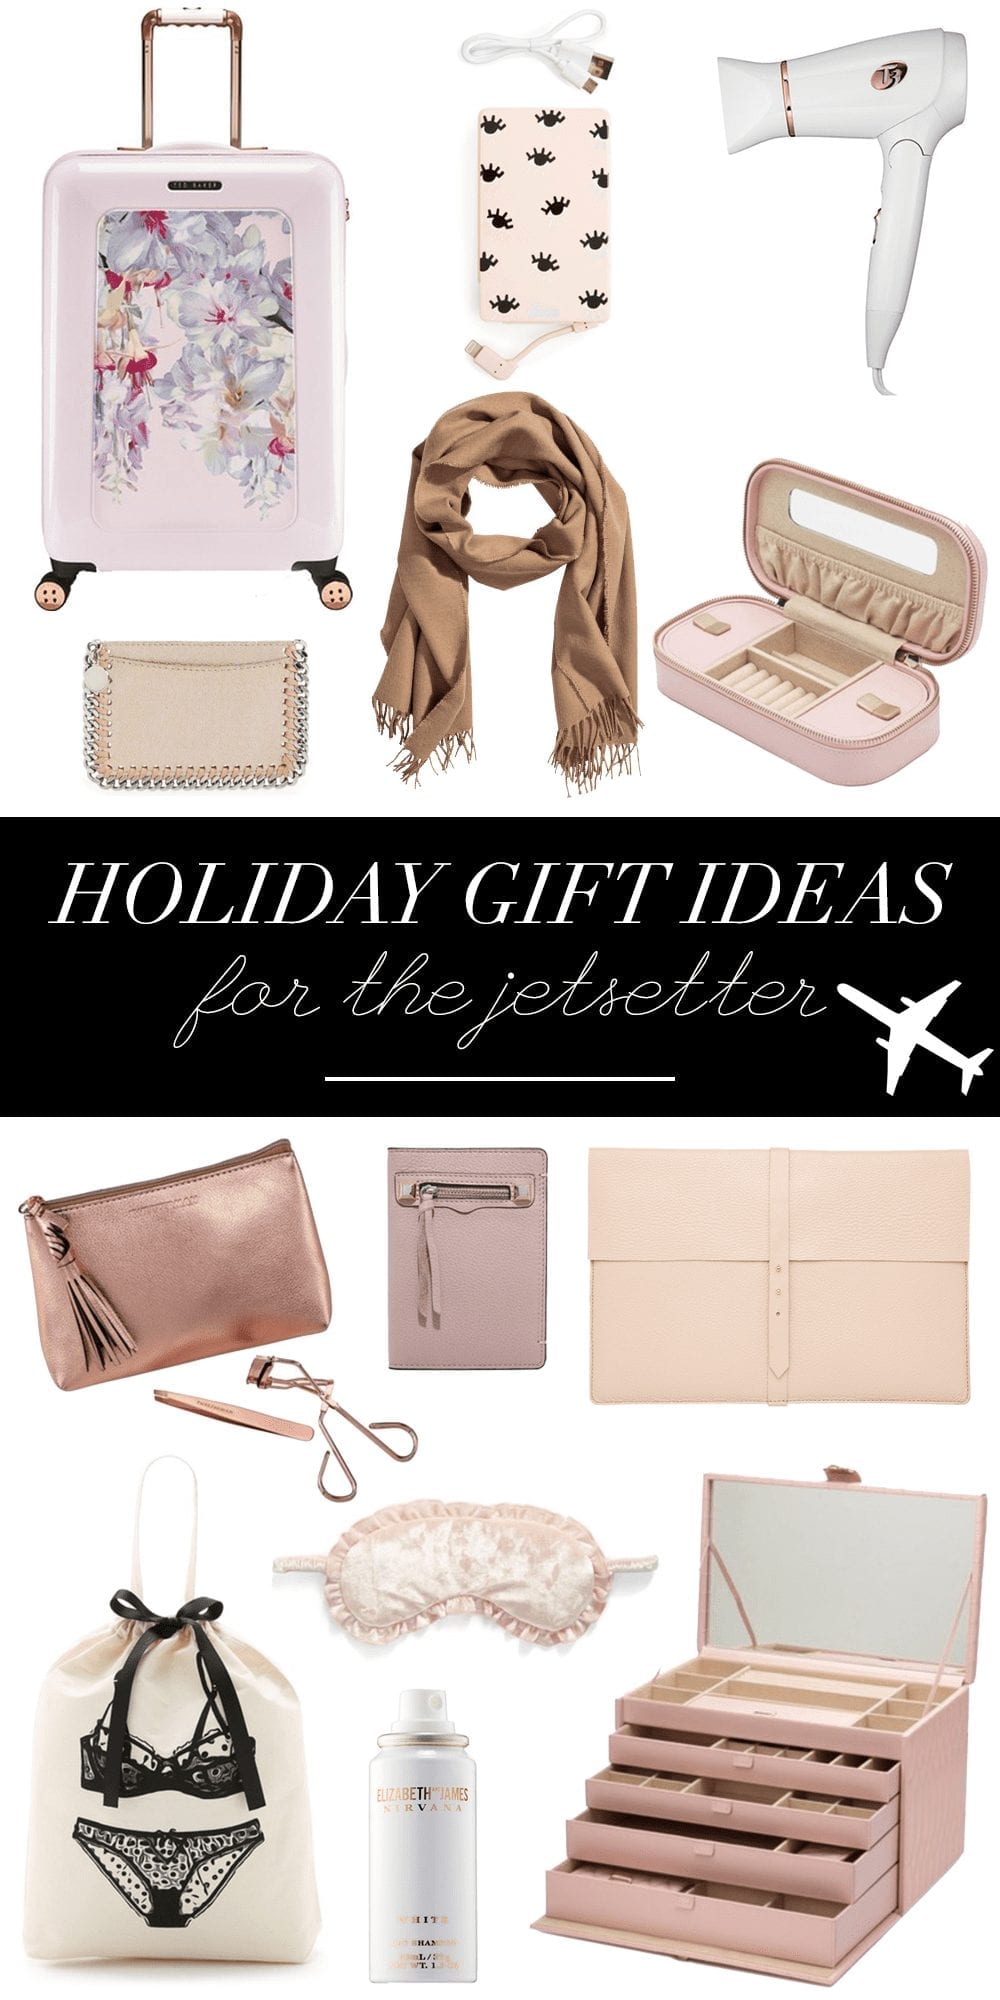 Holiday Gift Ideas, Christmas Gifts, Gift Guide, Holiday Gift Guide, Travel Essentials, Gifts For The Jetsetter